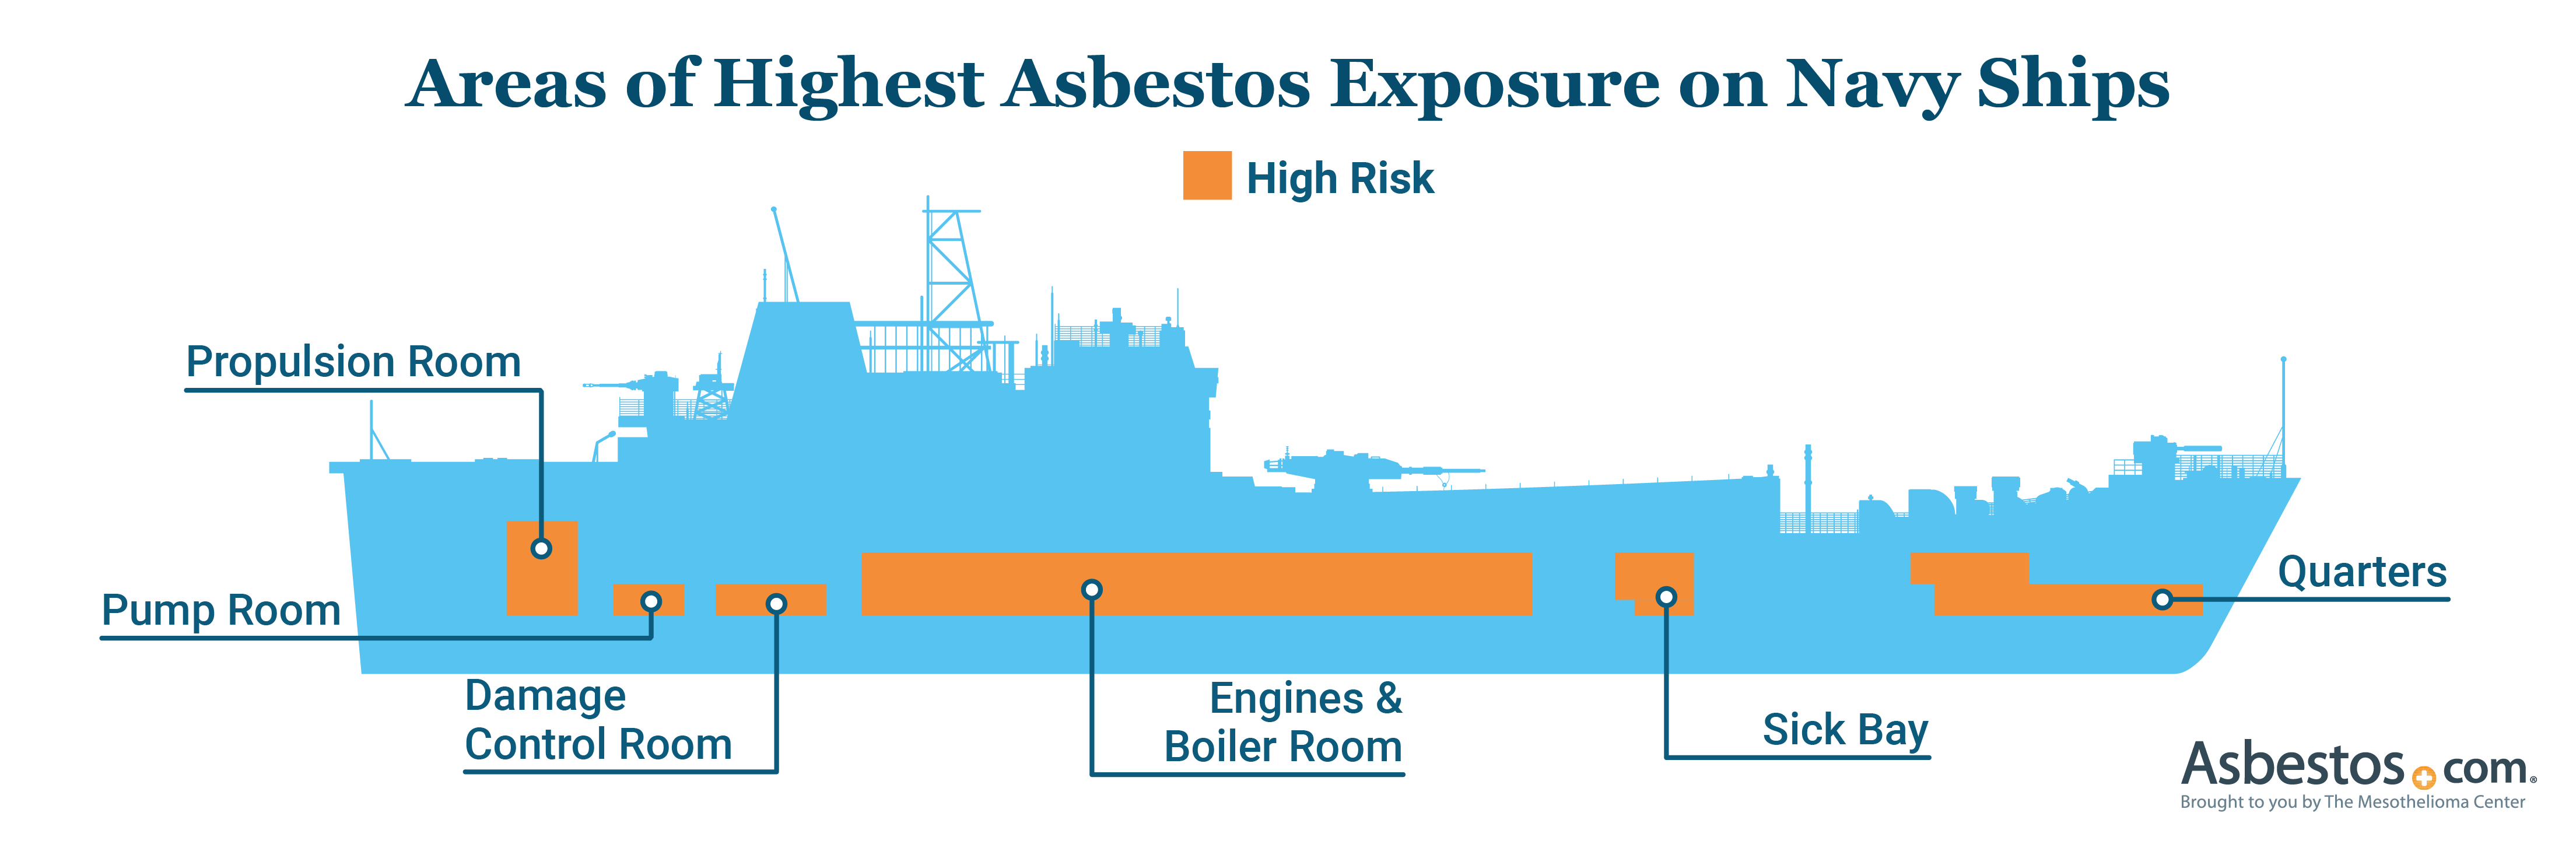 Military ship showing areas of high asbestos exposure